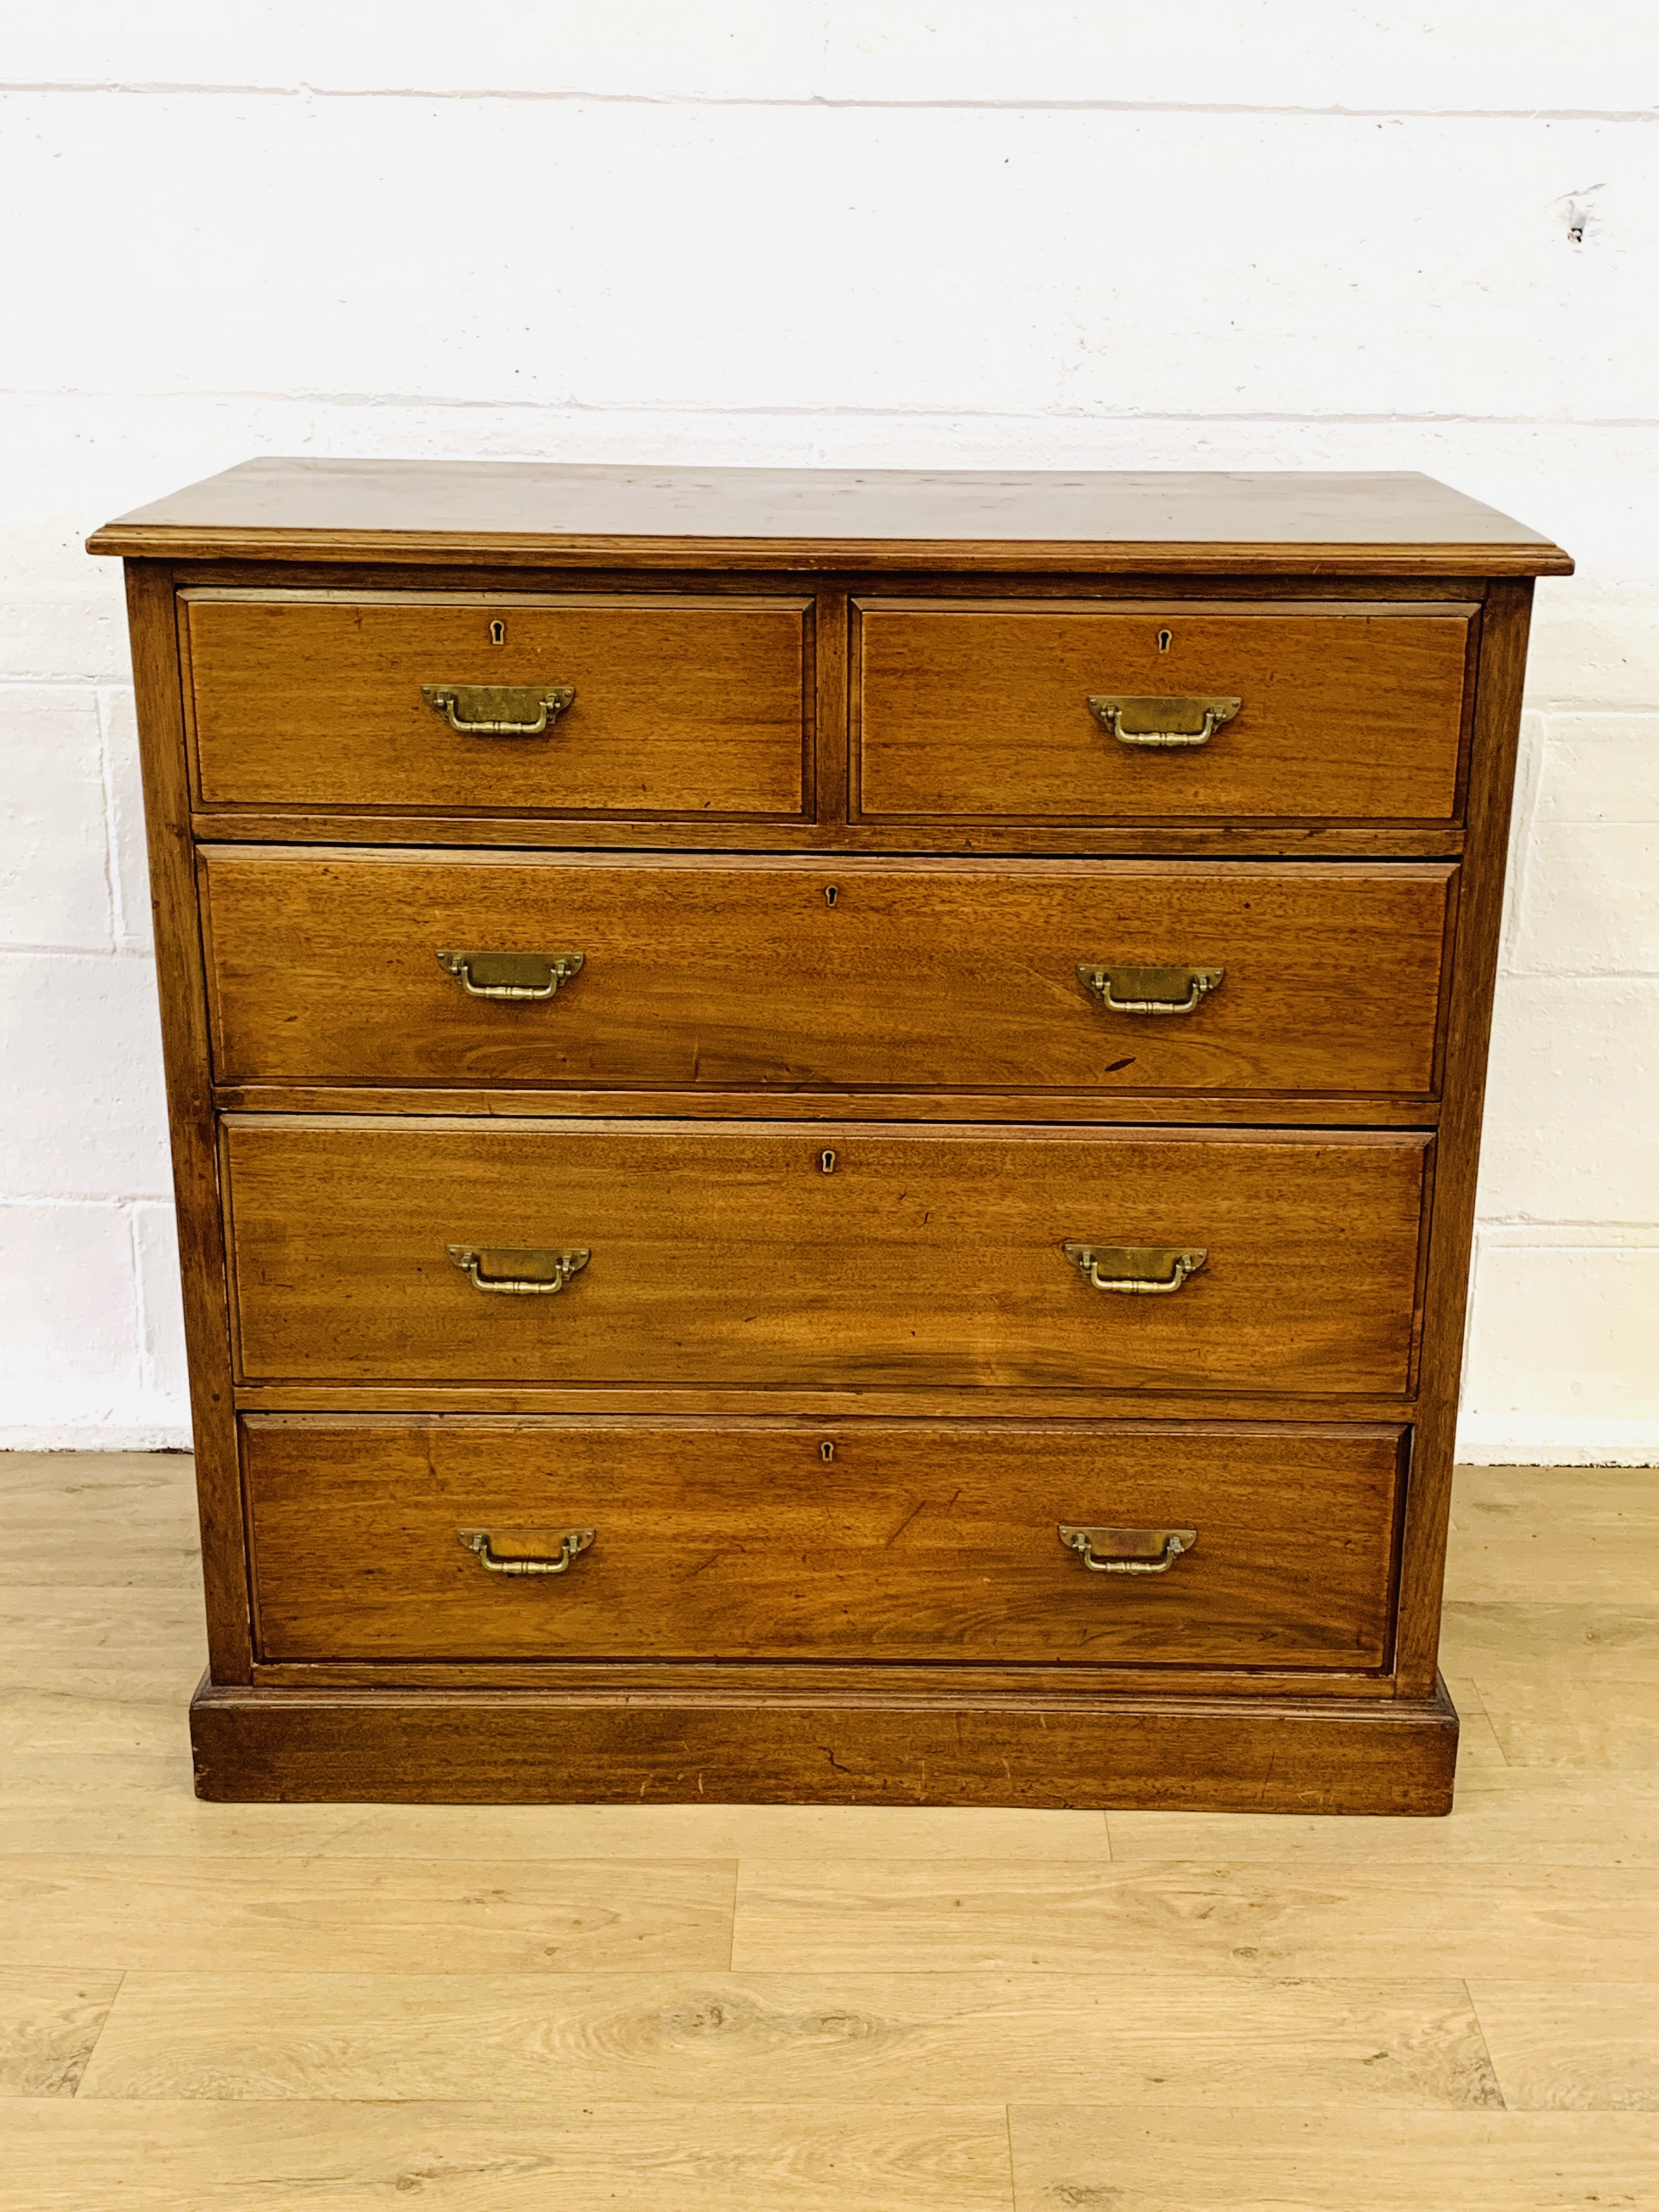 Mahogany chest of drawers - Image 5 of 8